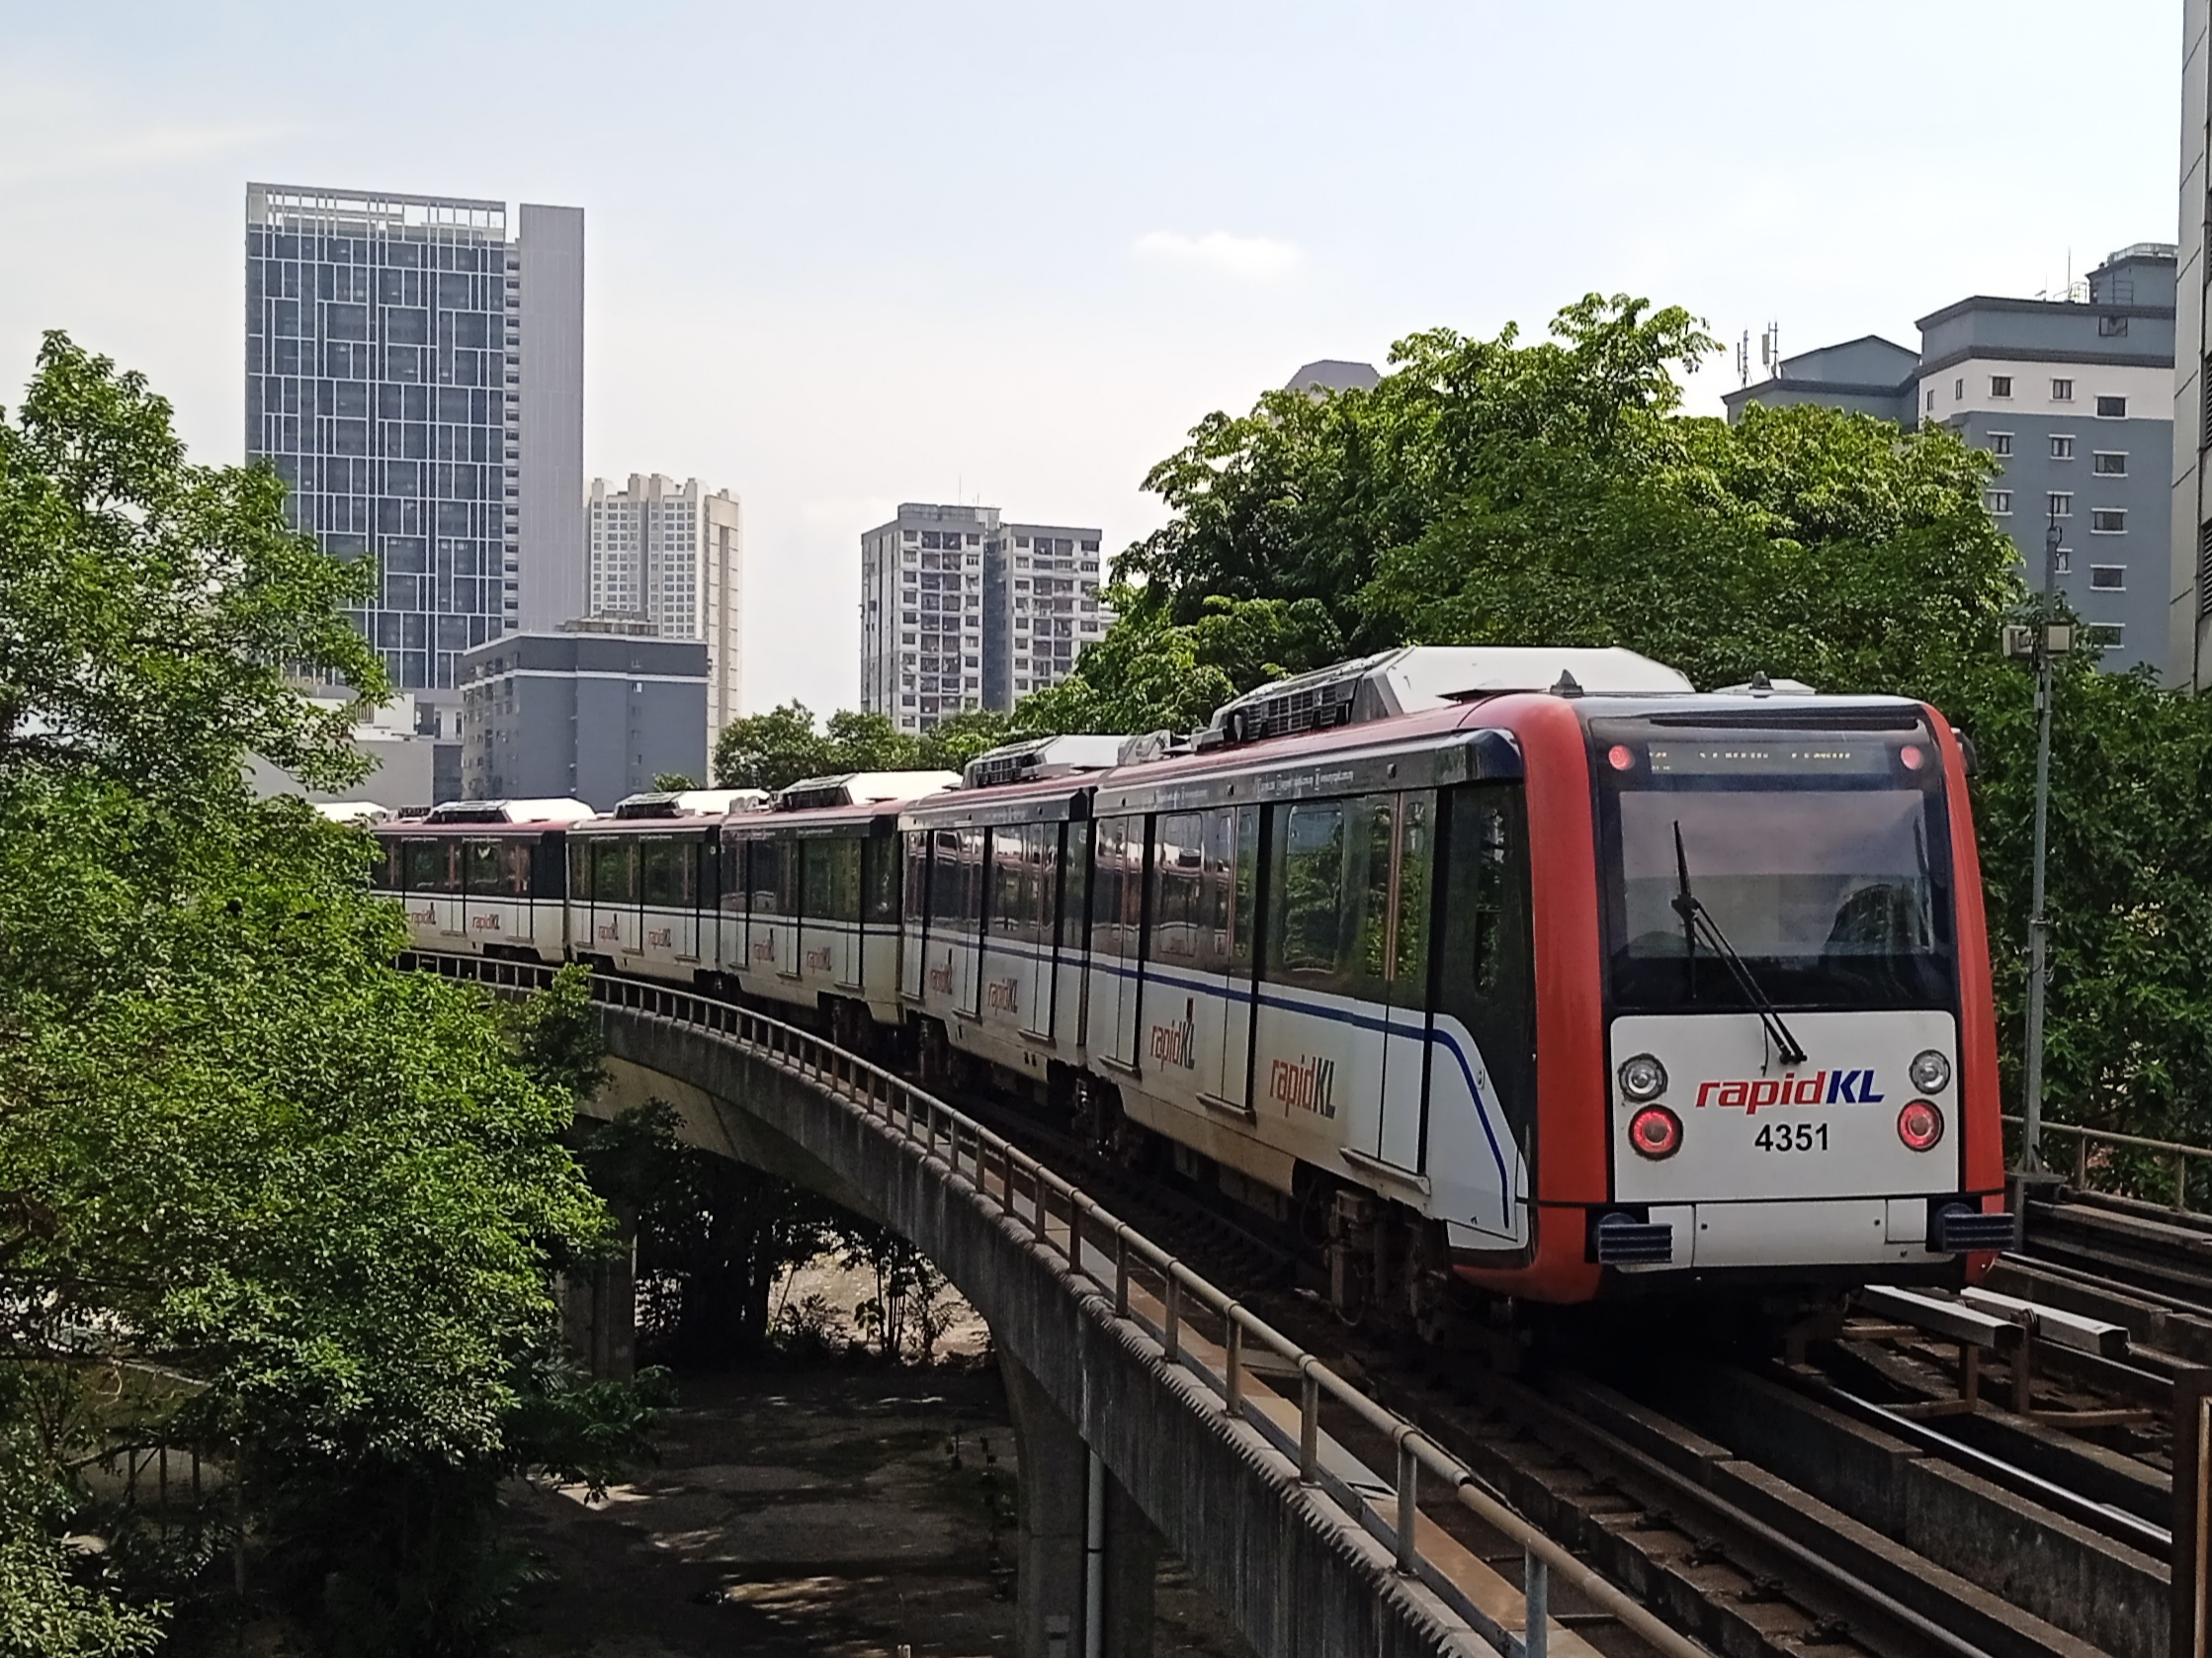 AMY 35 leaving Sultan Ismail LRT Station 20230813 105651